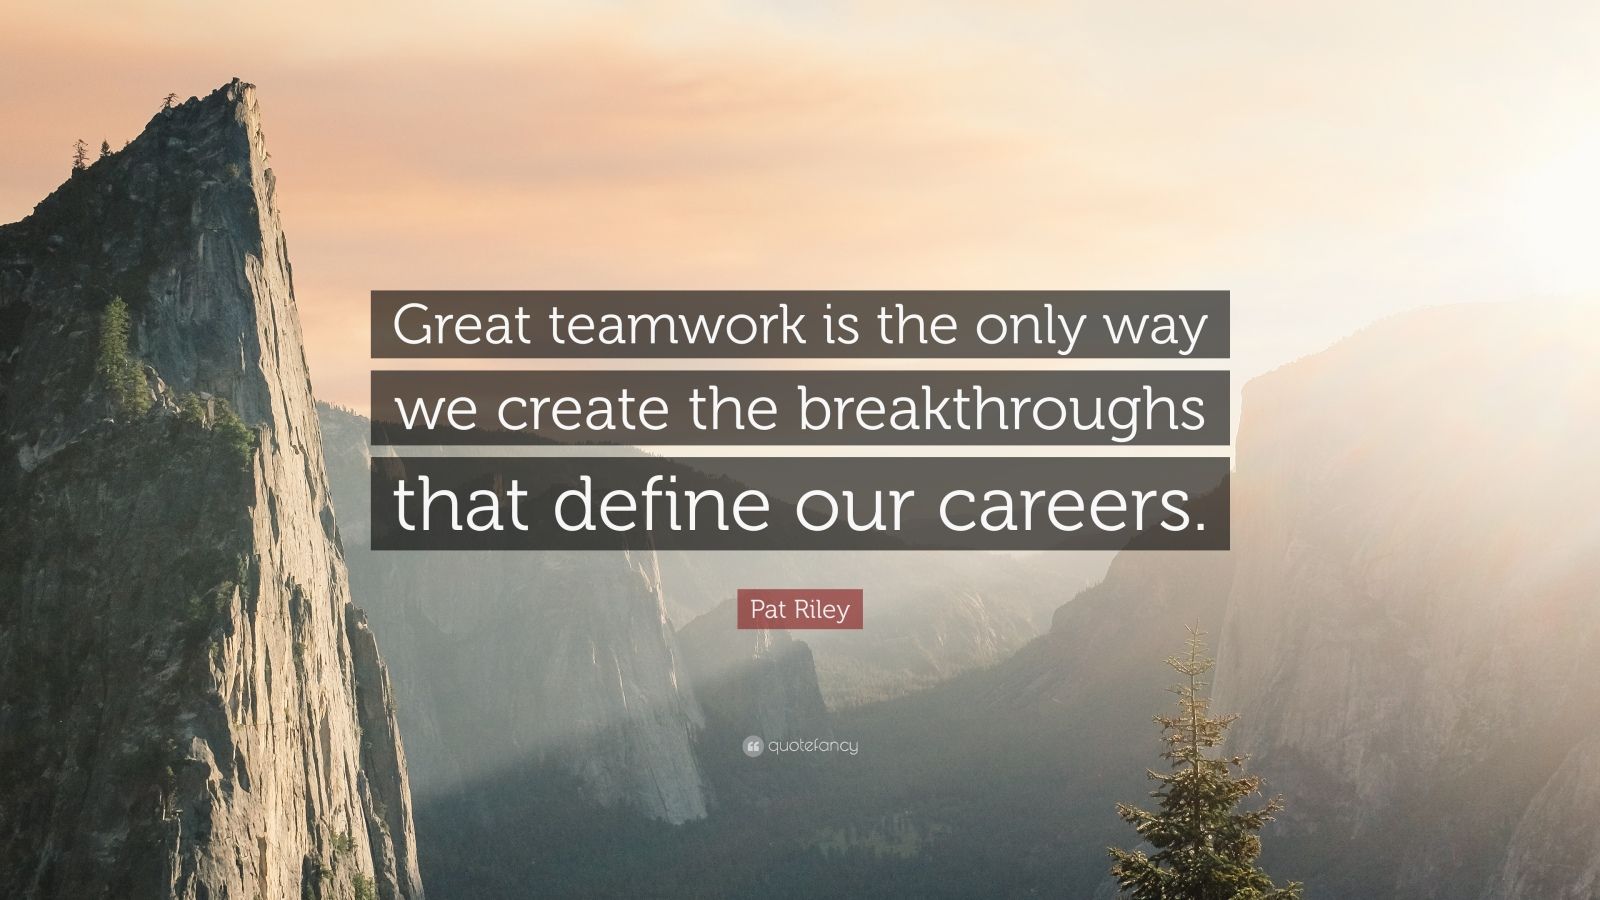 Pat Riley Quote: “Great teamwork is the only way we create the